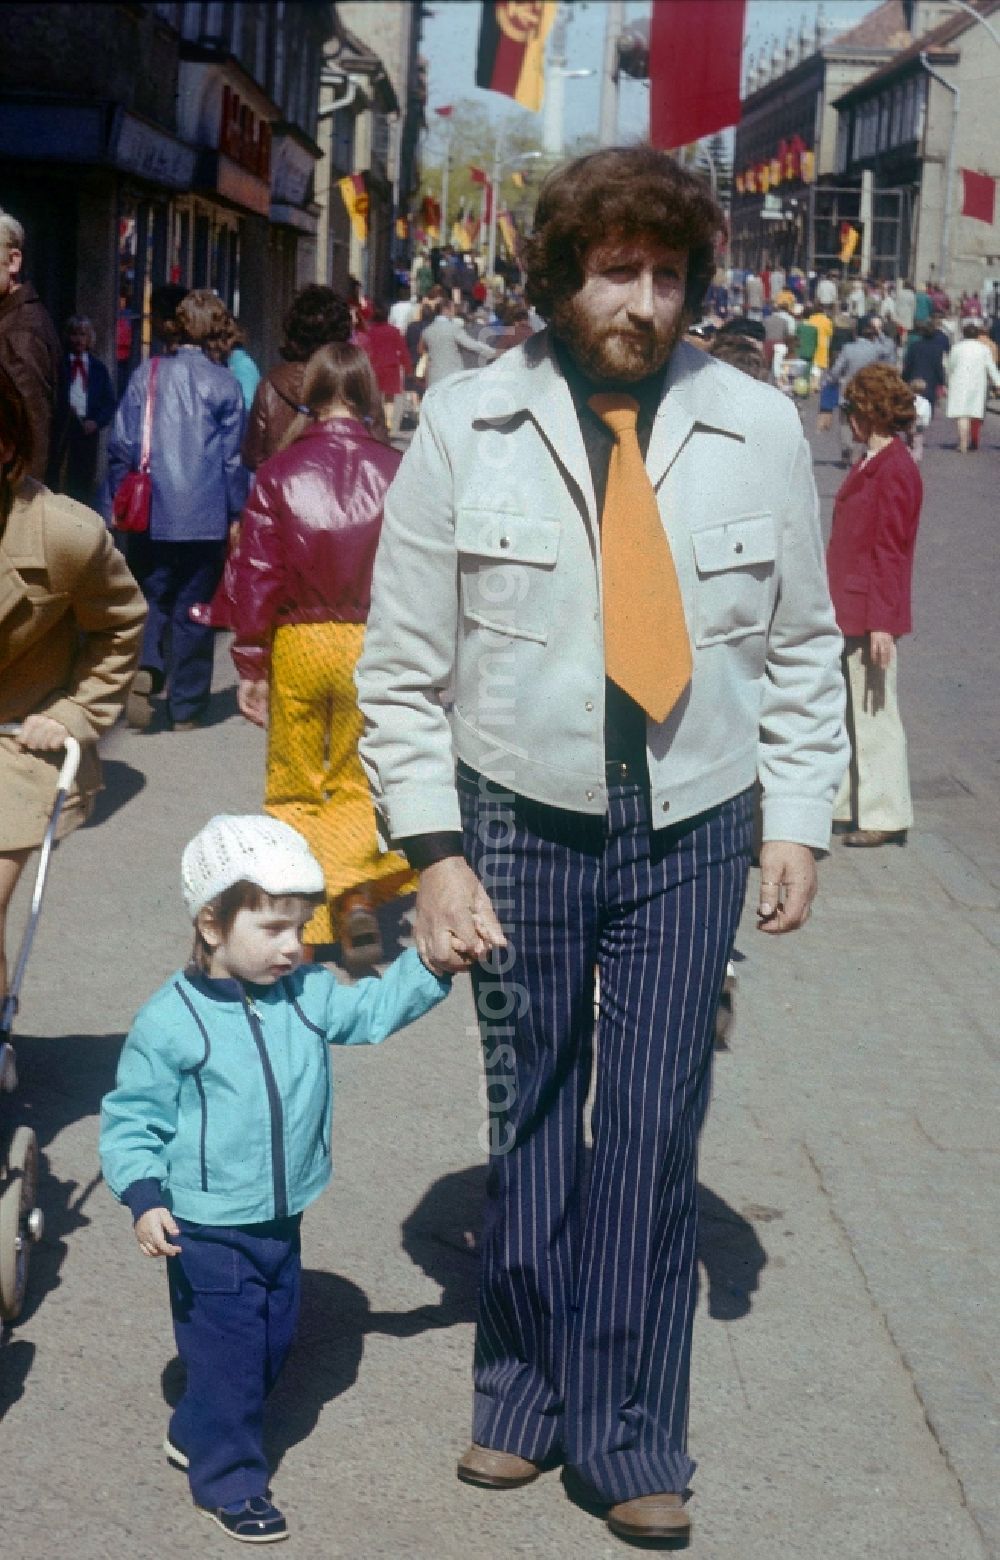 GDR picture archive: Neustrelitz - A father with child at the 1st of May demonstration in Neustrelitz in Mecklenburg-Vorpommern in the territory of the former GDR, German Democratic Republic